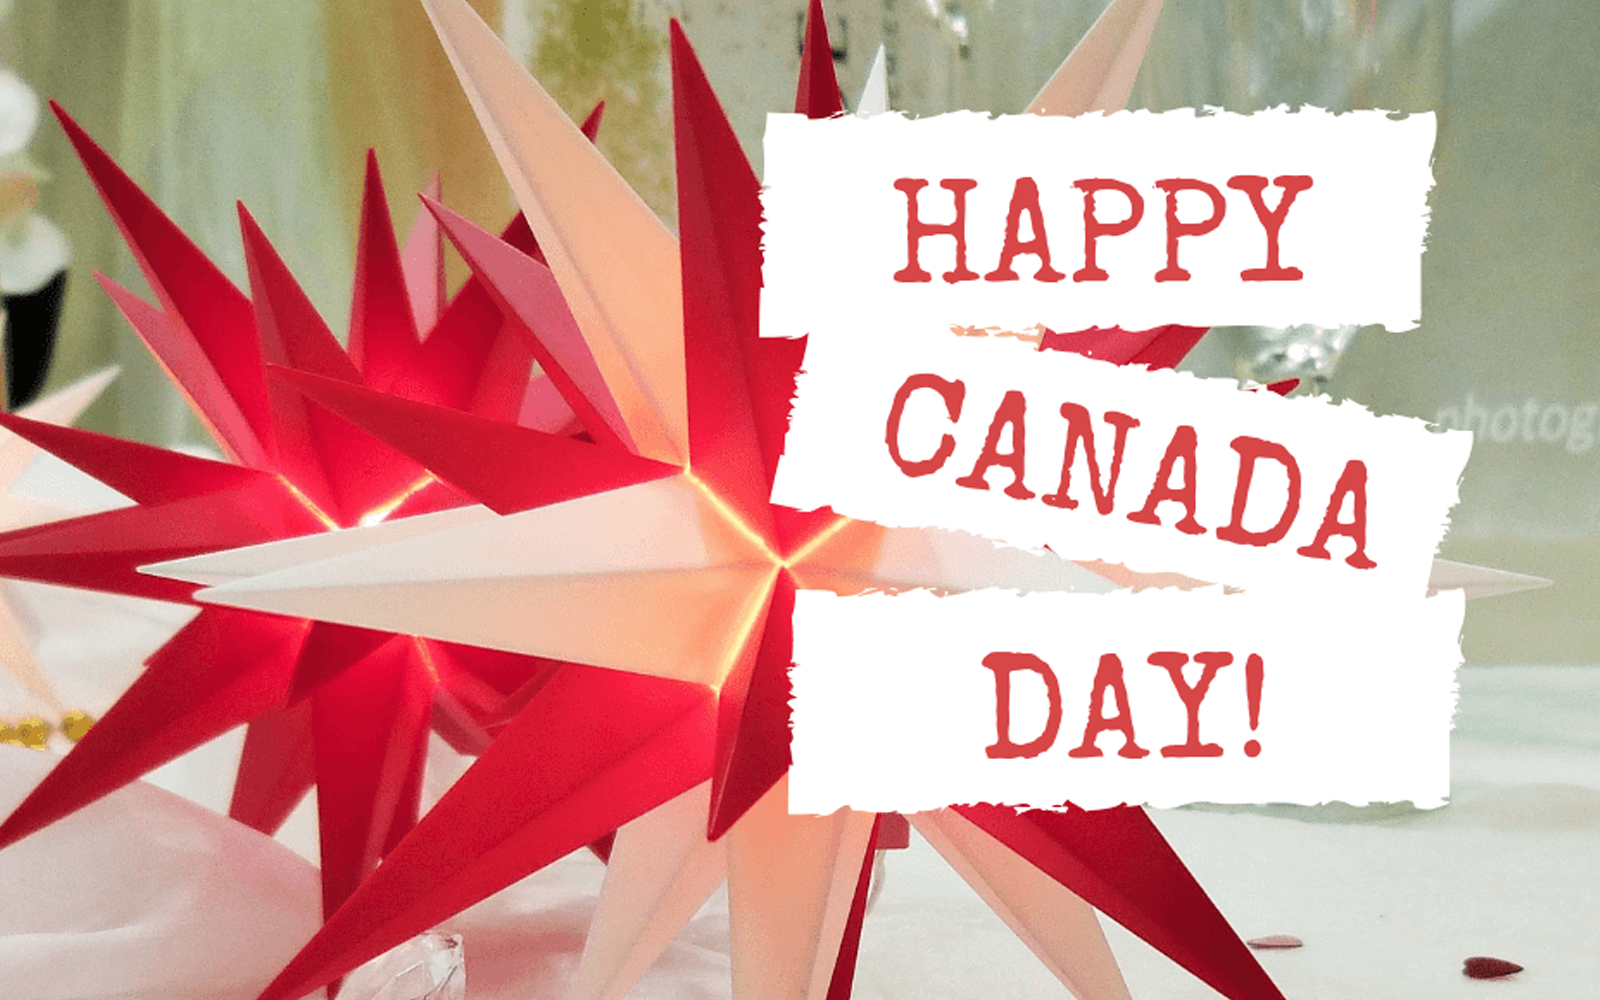 HAPPY CANADA DAY - SOME FACTS YOU MIGHT BE INTERESTED IN